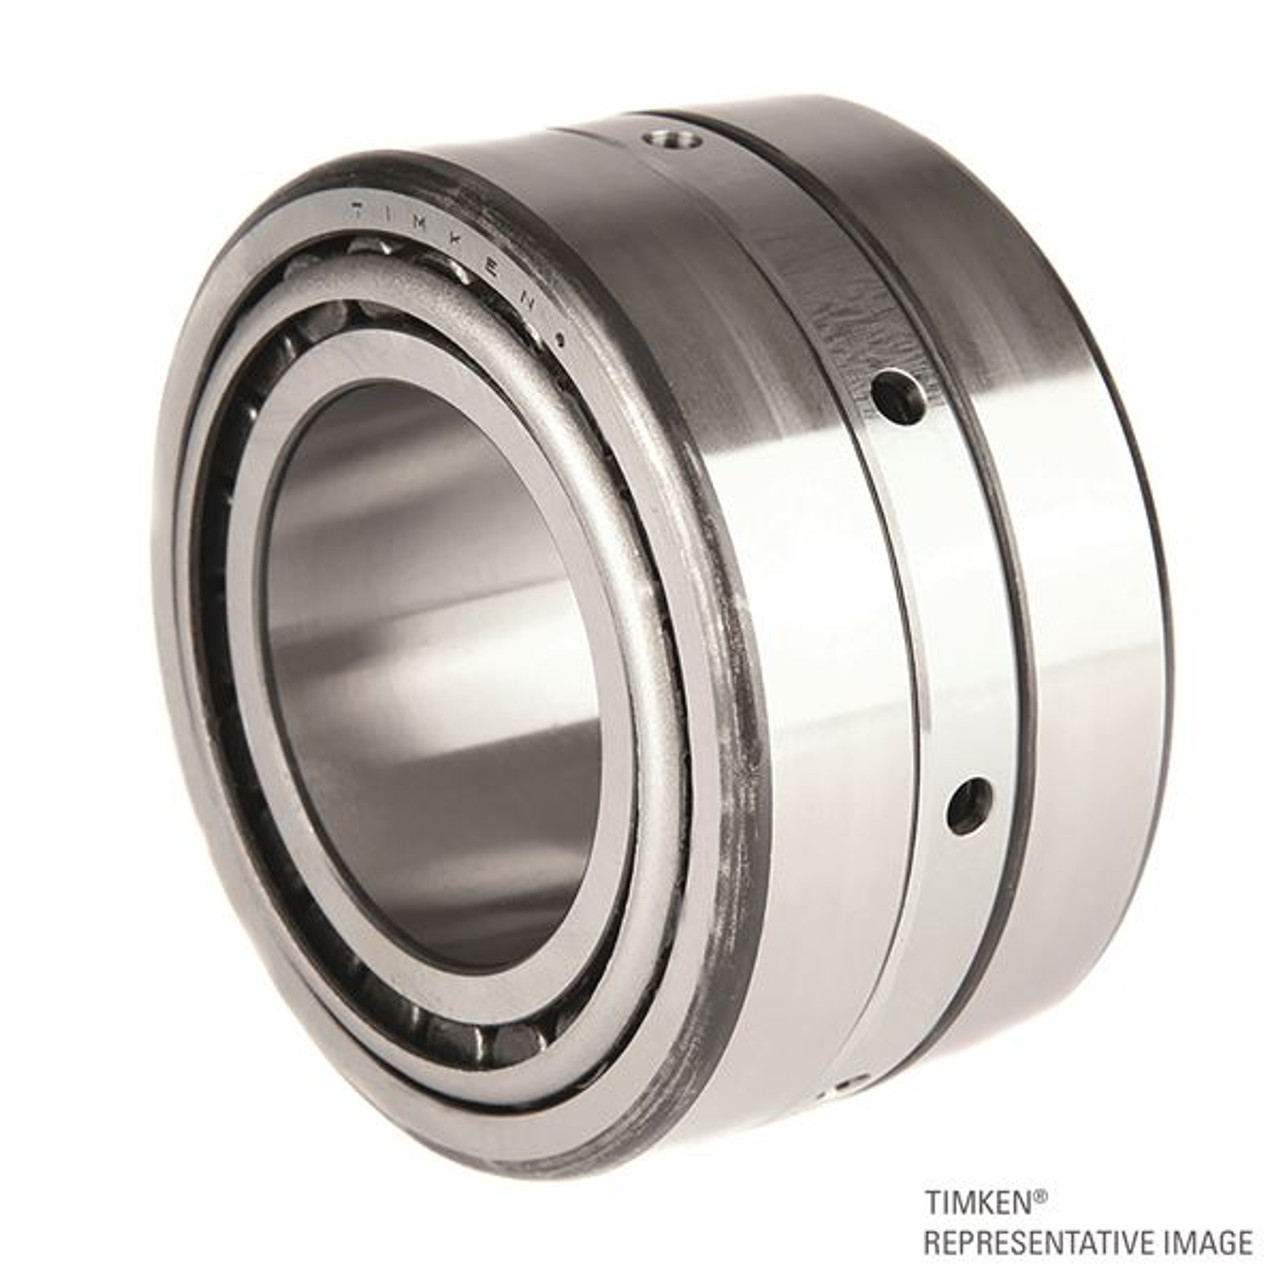 Timken® TDI Single Double Cone Assembly  NA759SW-90161